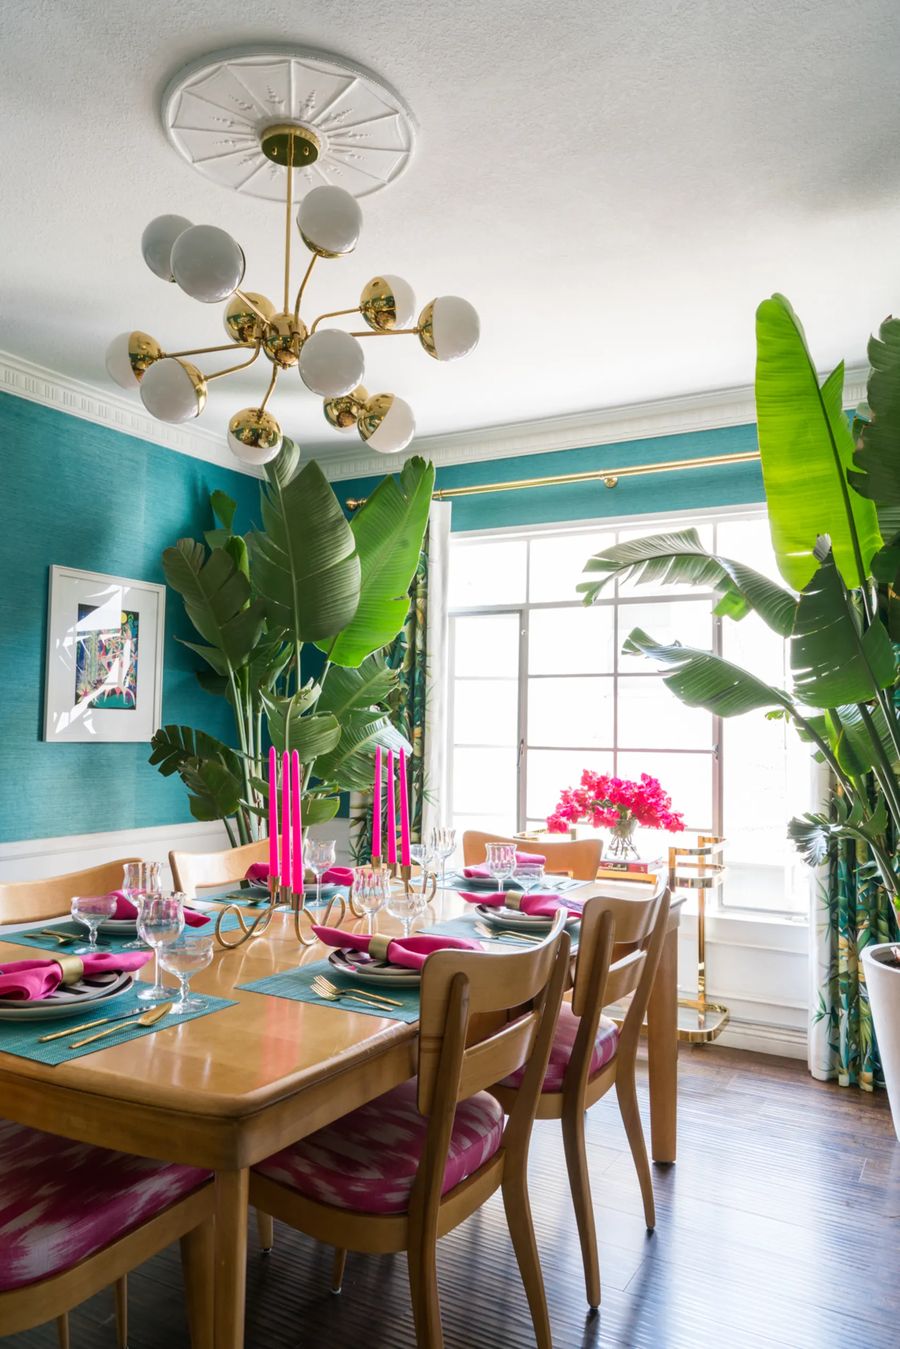 Turquoise Walls in Tropical Dining Room via Apartment Therapy